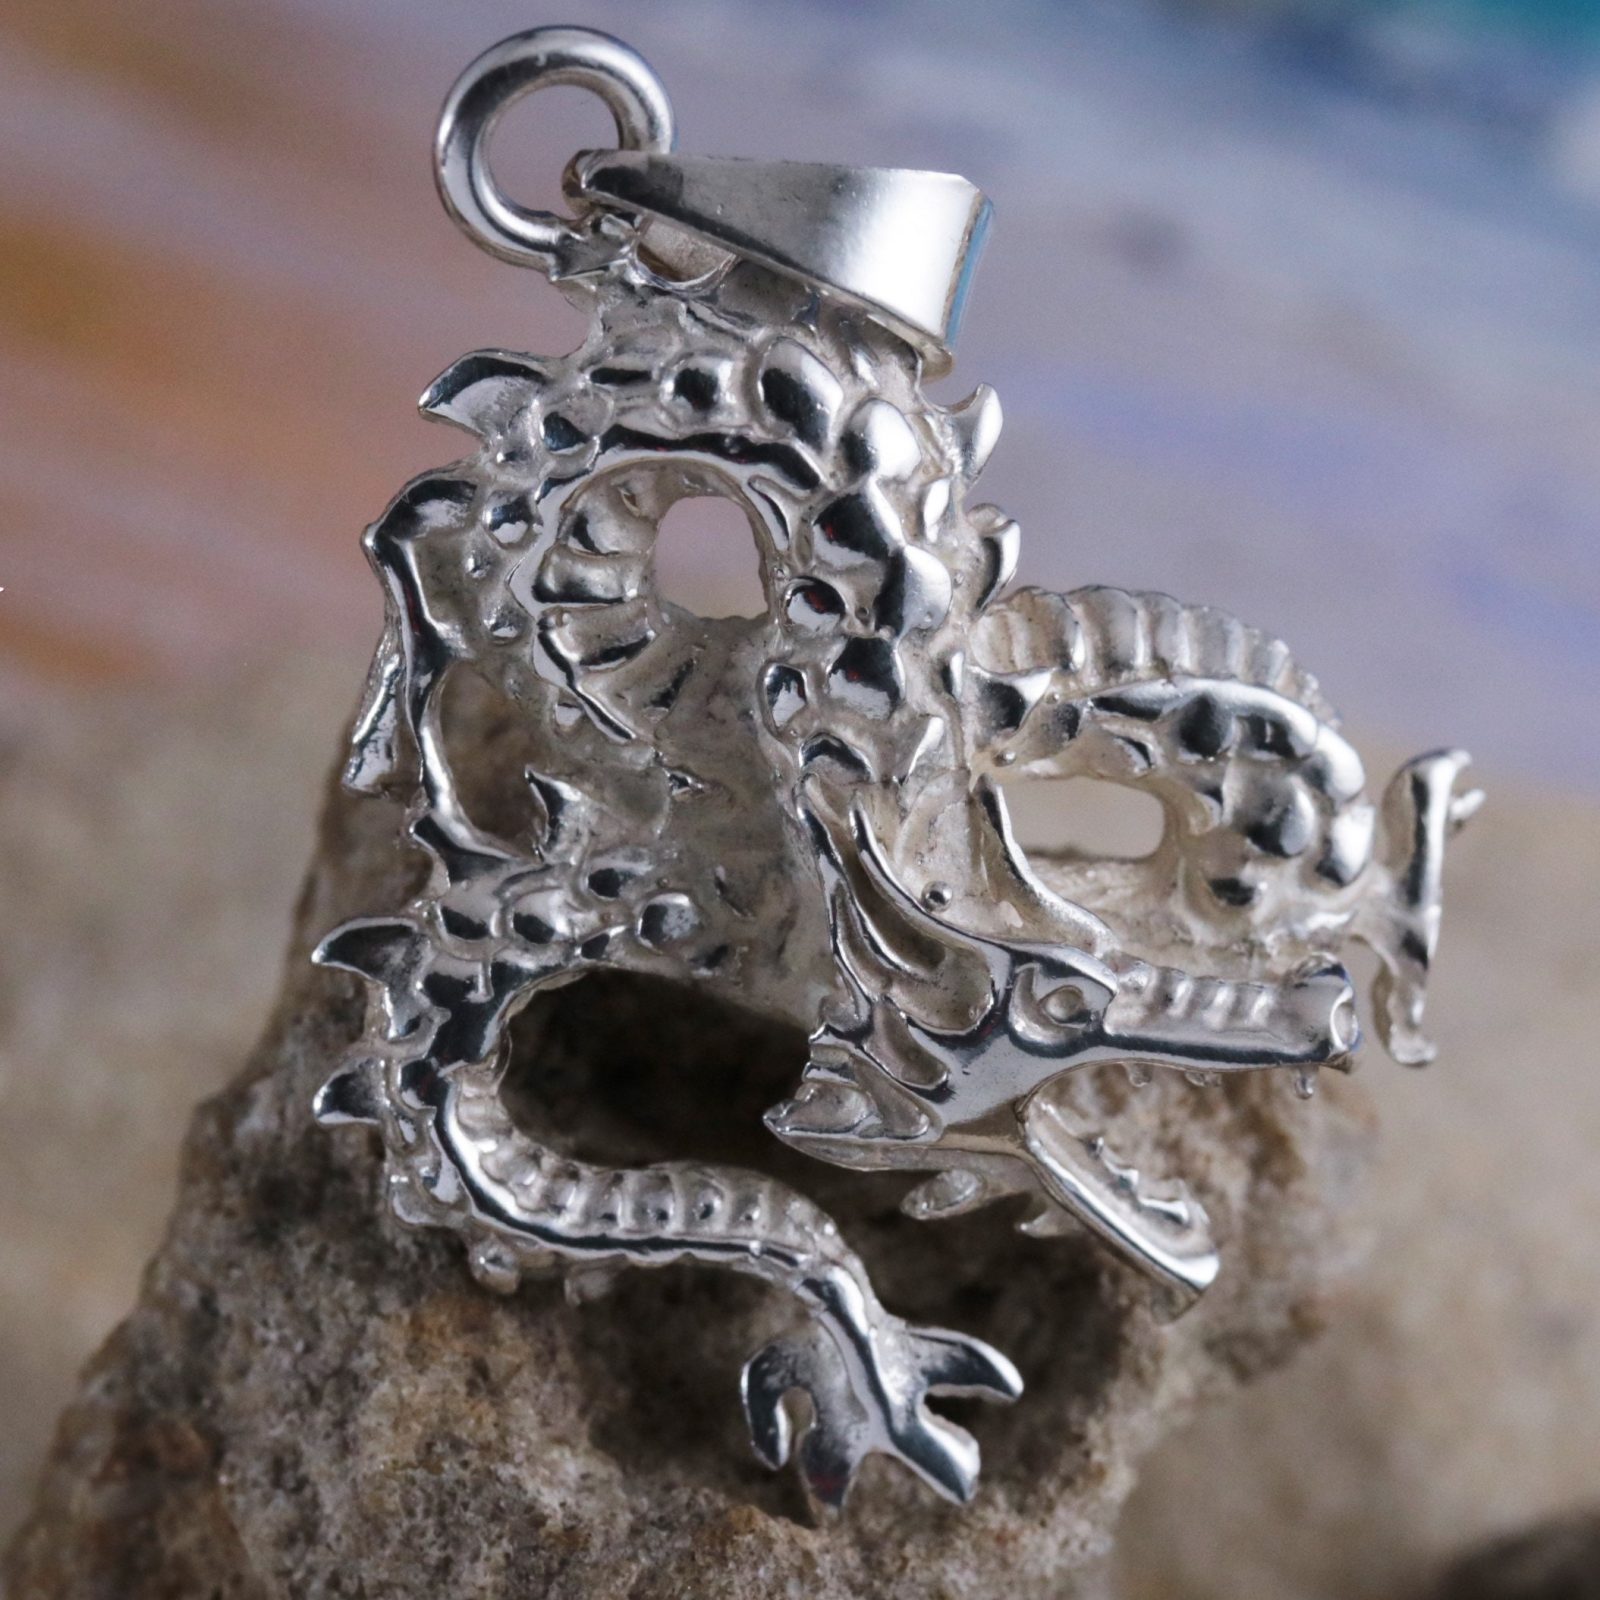 Sterling Silver Chinese Dragon Pendant Charm 1 1/2 tall